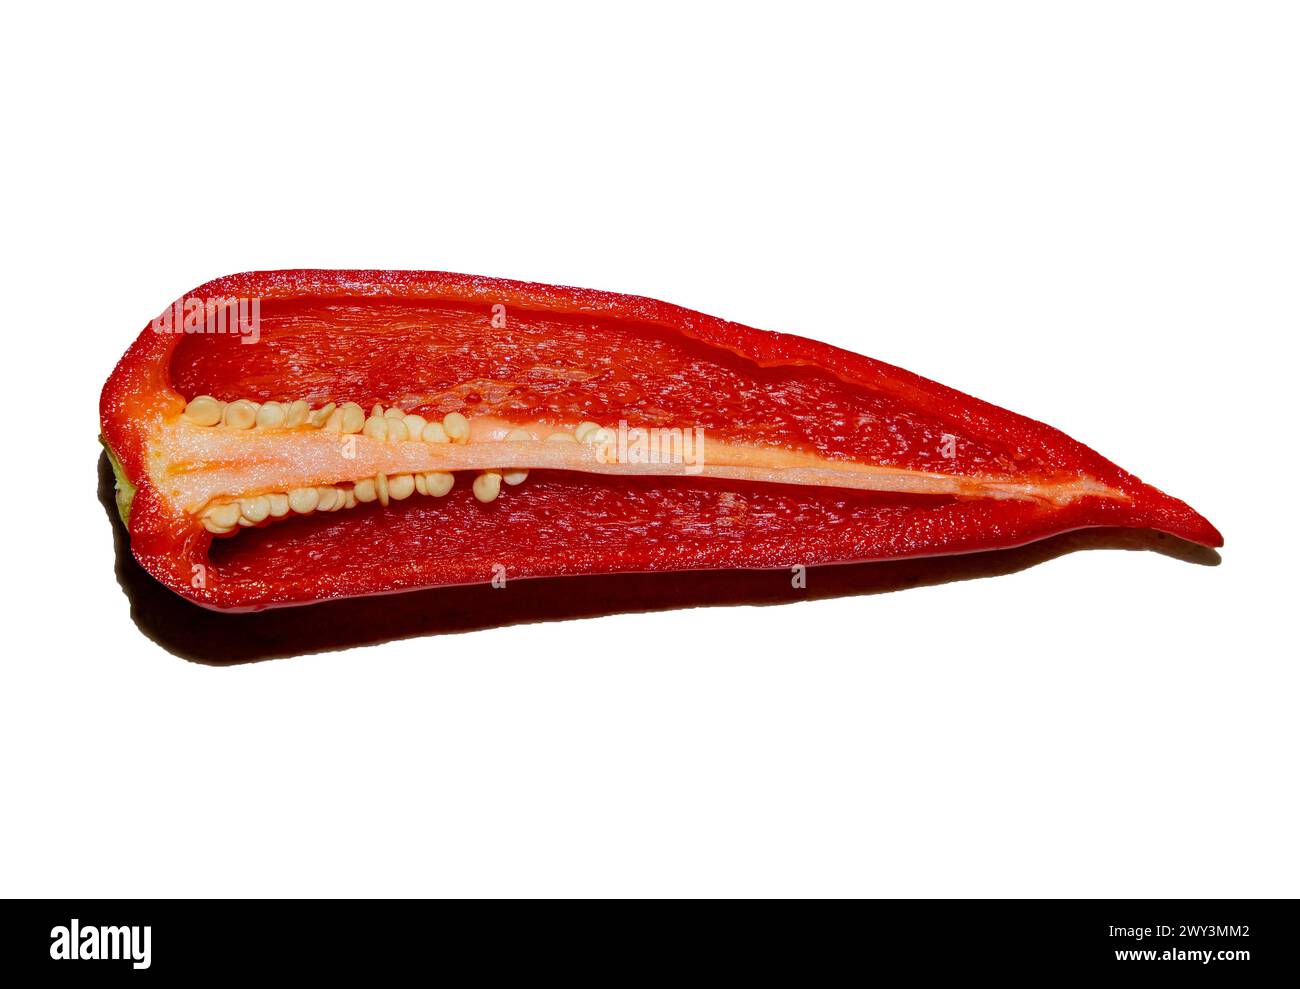 A red kapia pepper cut in two on a white background Stock Photo